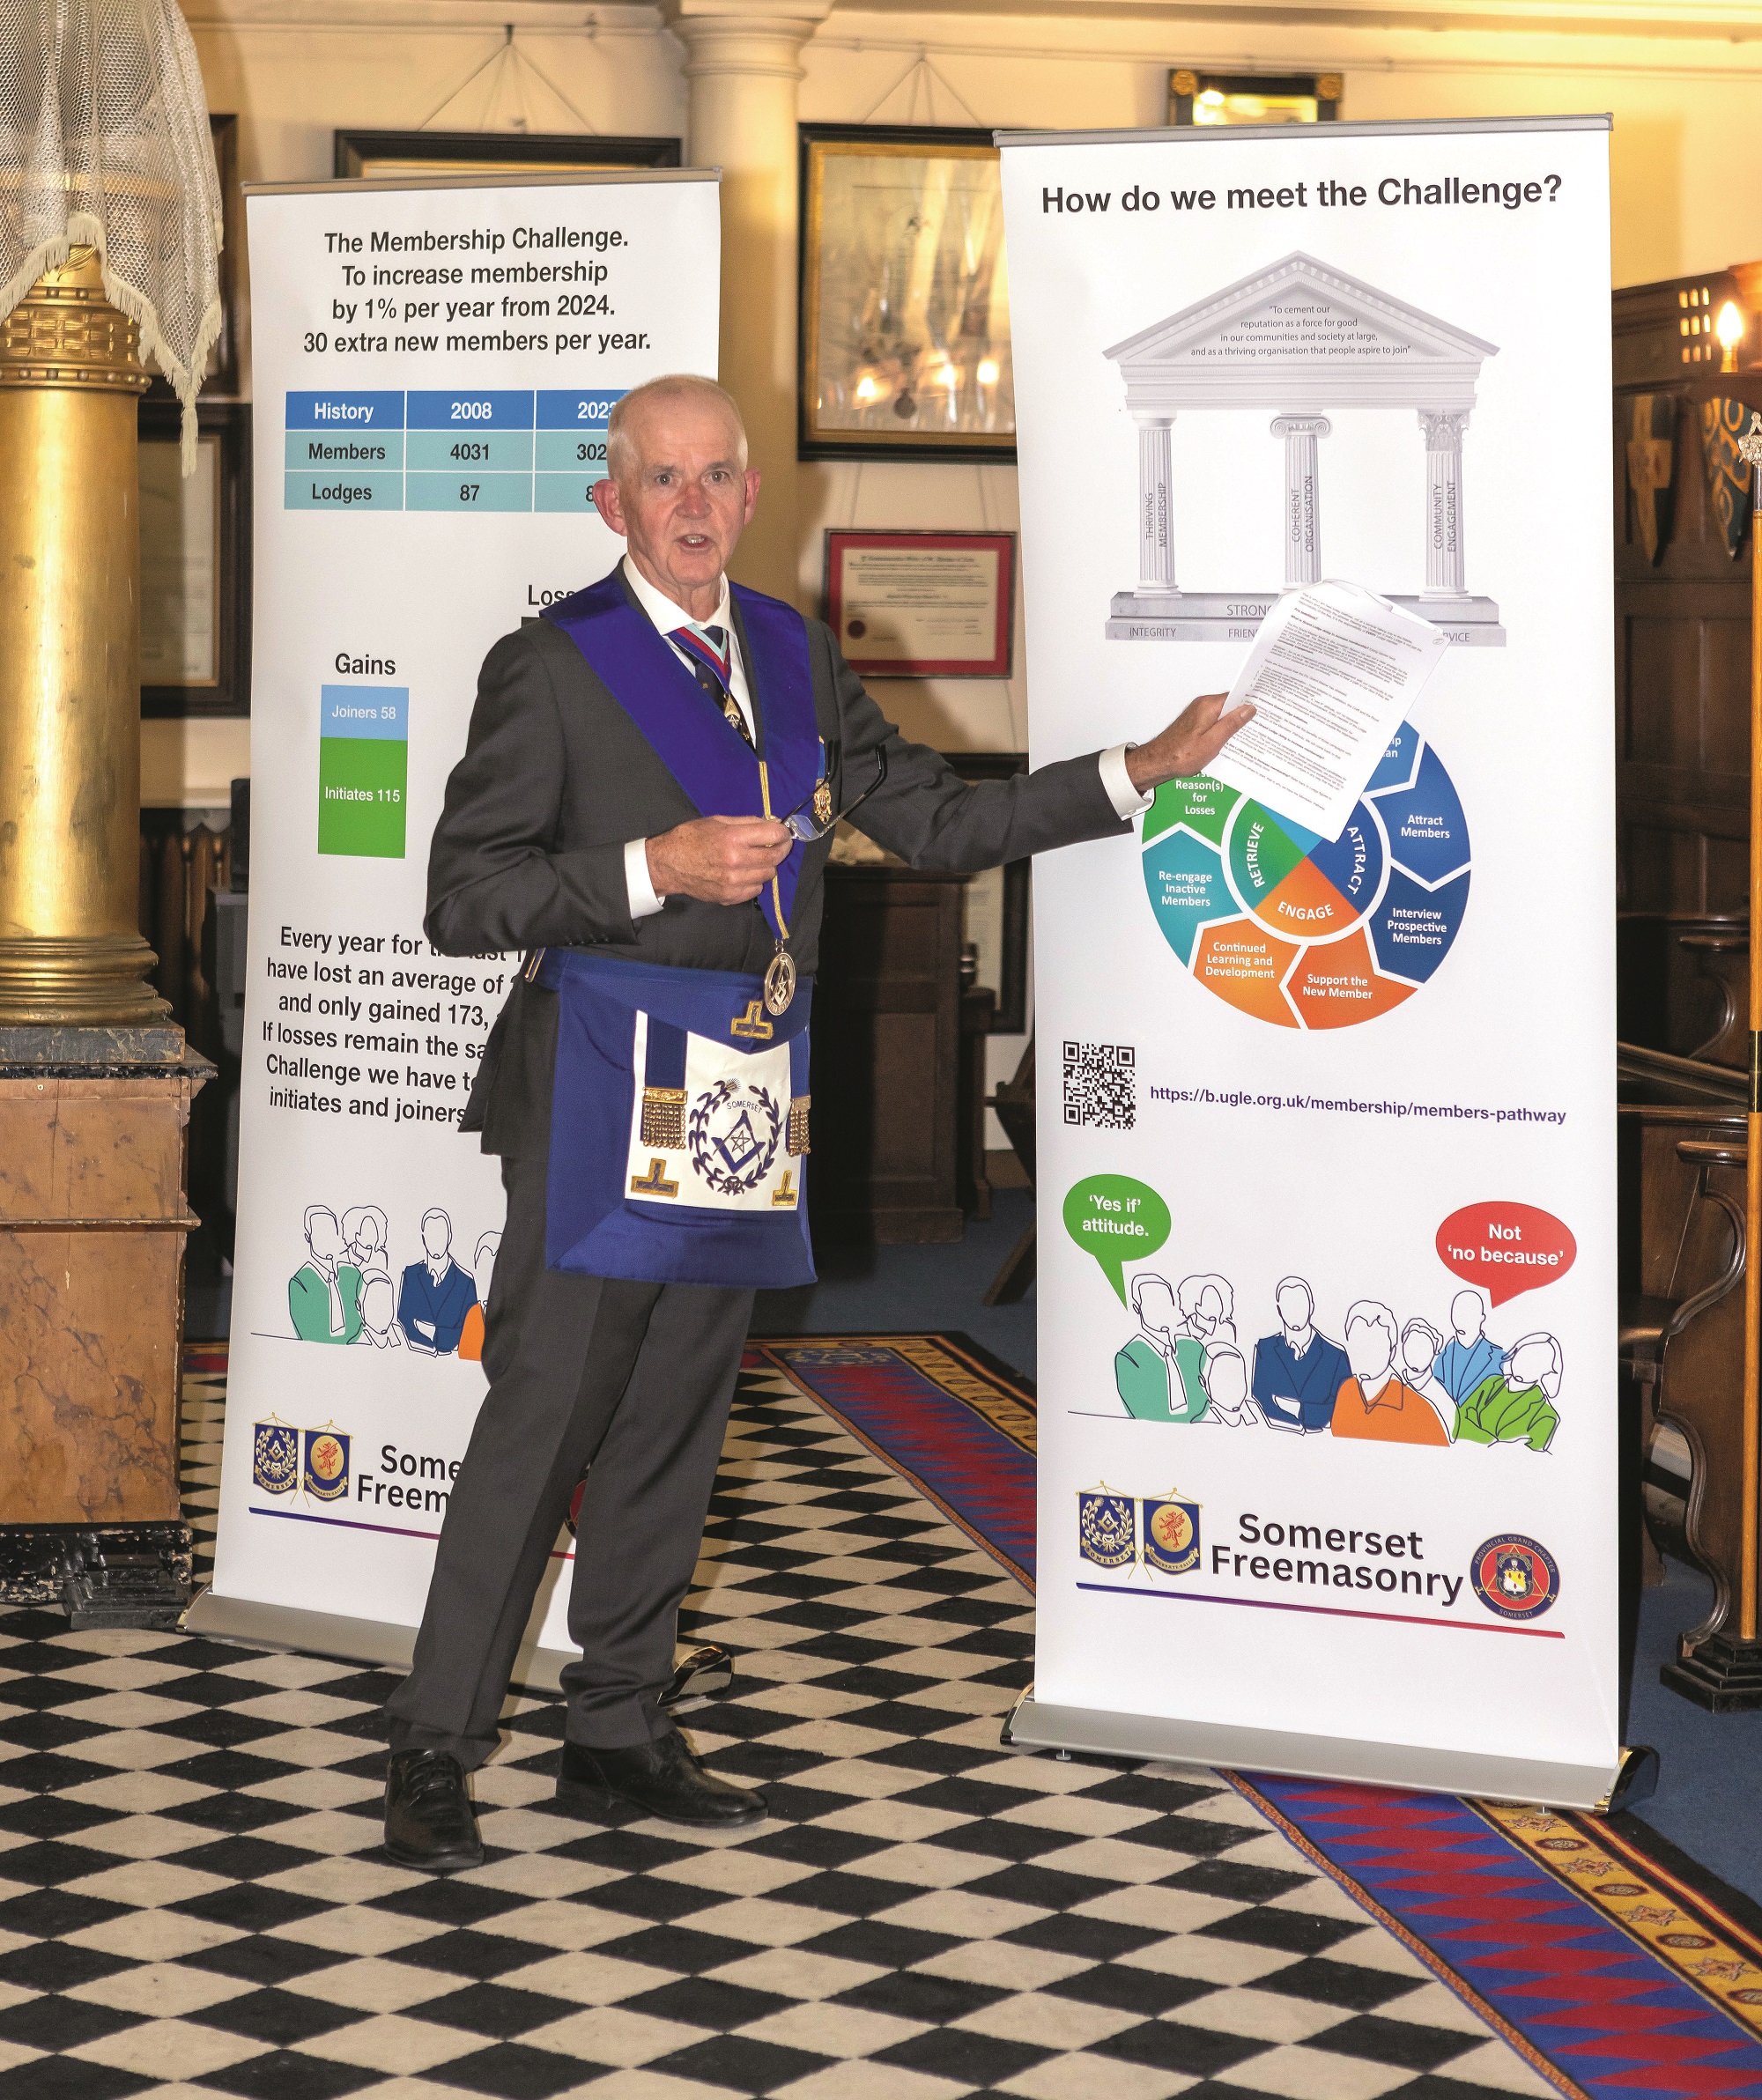 Ray Guthrie, Head of Somerset Freemasons, delivering a presentation